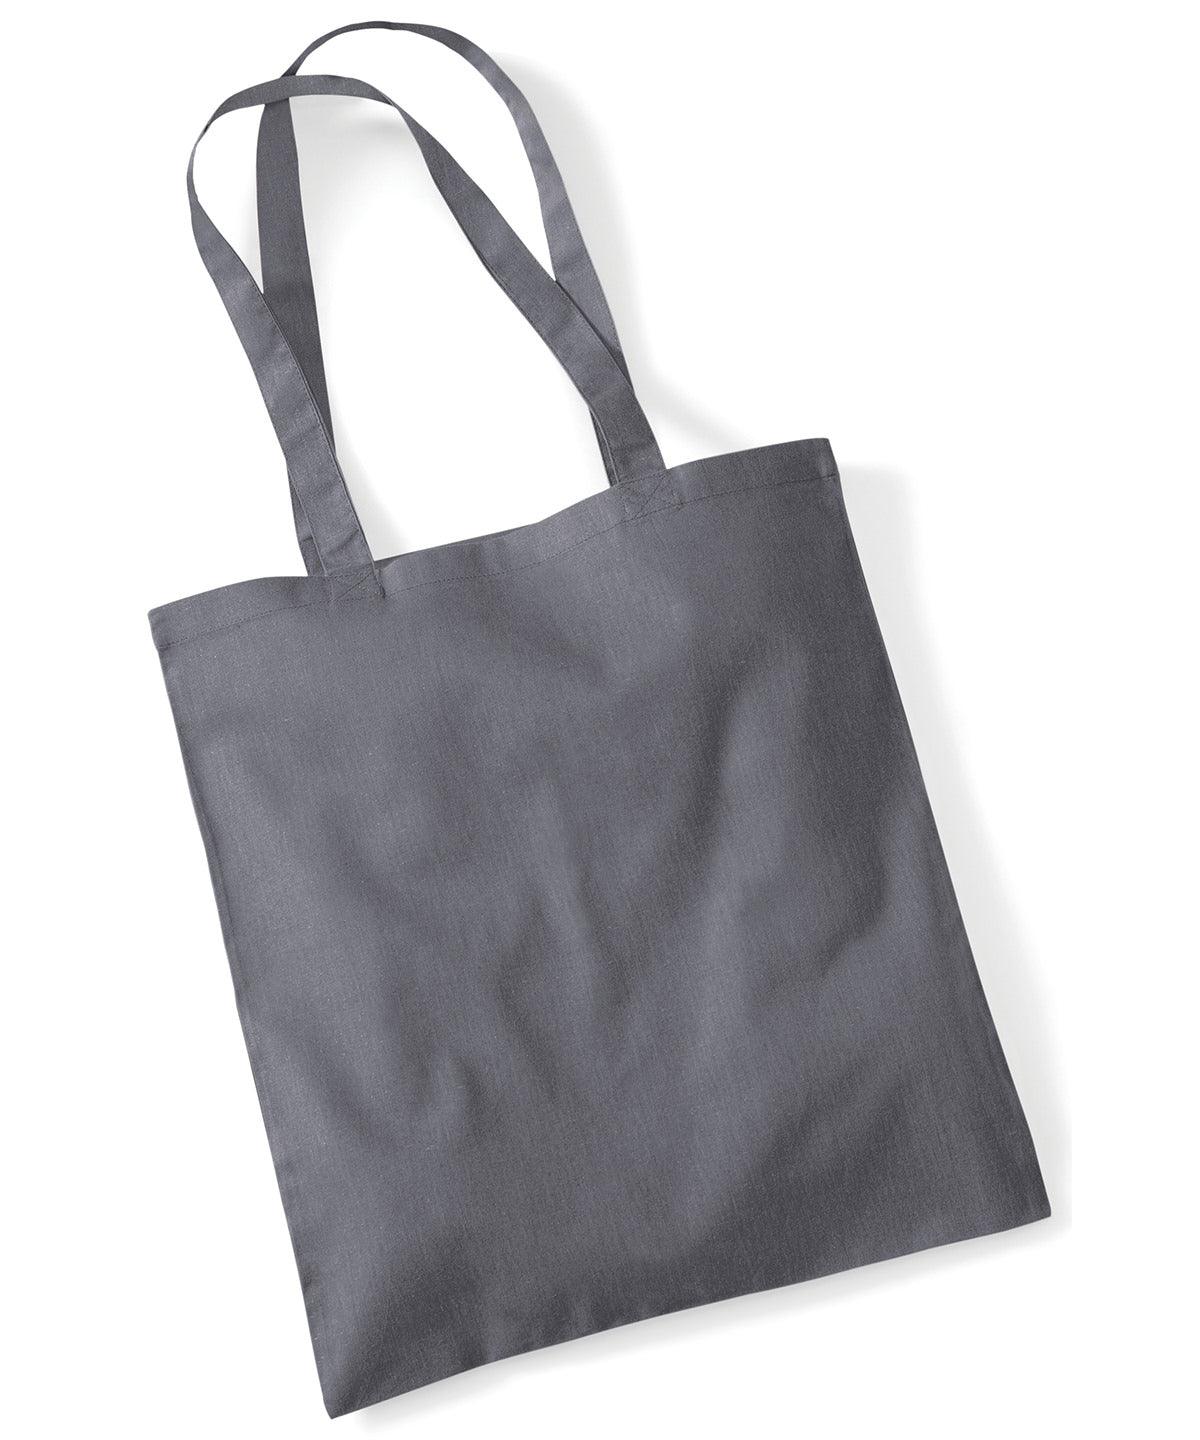 Graphite Grey - Bag for life - long handles Bags Westford Mill Bags & Luggage, Crafting, Must Haves, Rebrandable Schoolwear Centres